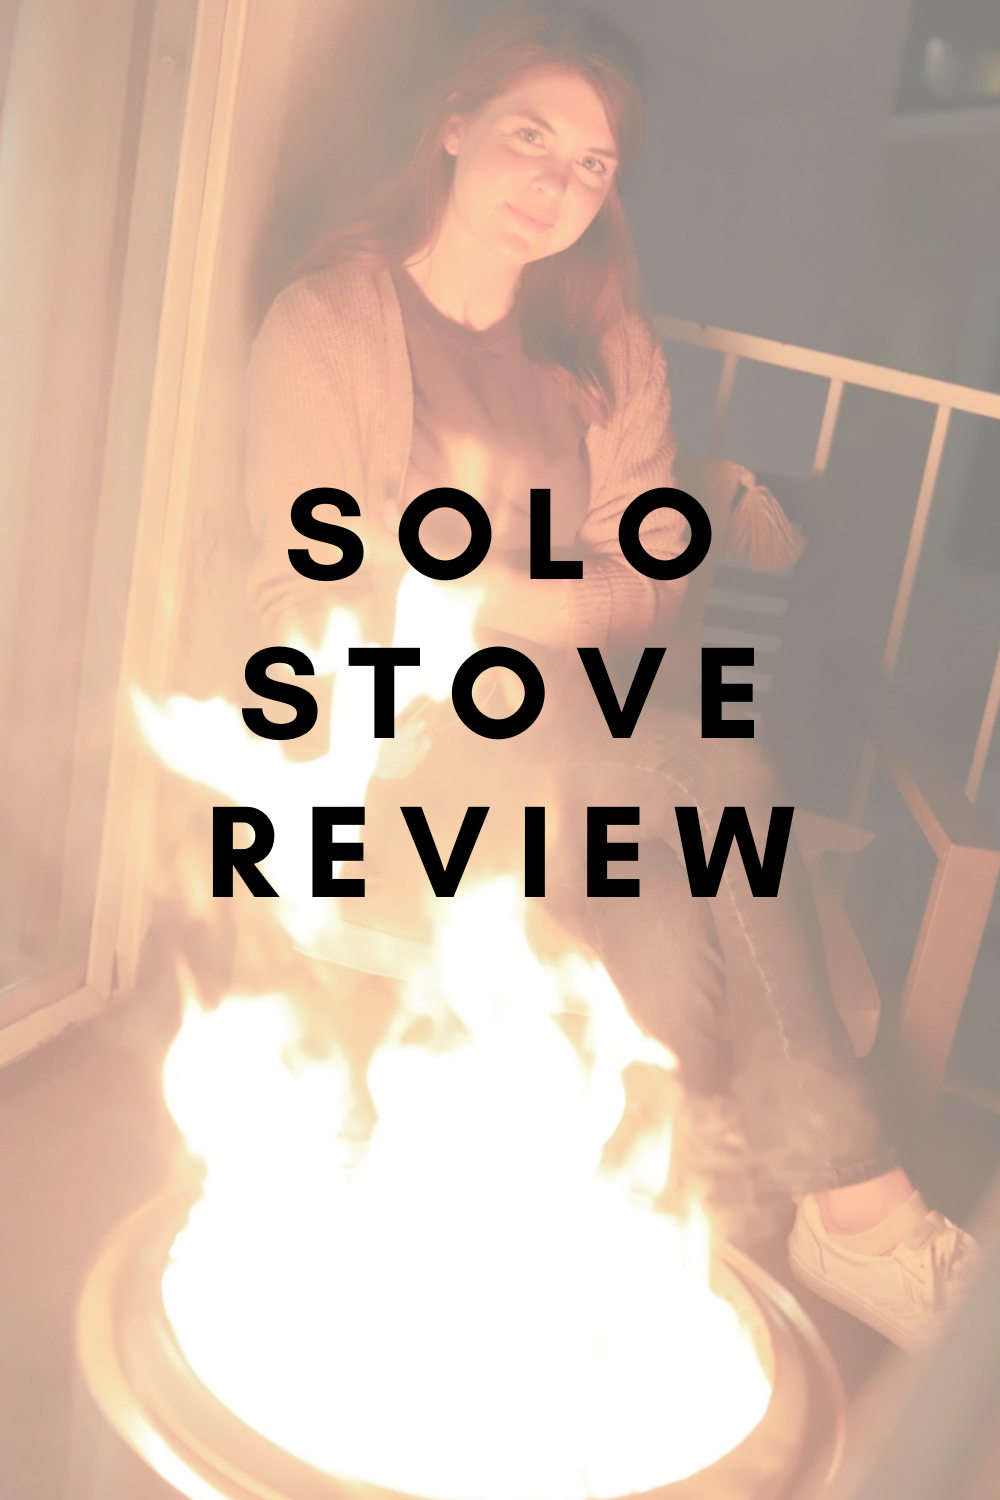 solo stove review, easy fire pit, bonfire, ranger, yukon comparison, fire pit for your balcony, fire with less smoke, gift idea for an outdoorsman or outdoorswoman, cooking stove for camping, lments of style, la blogger